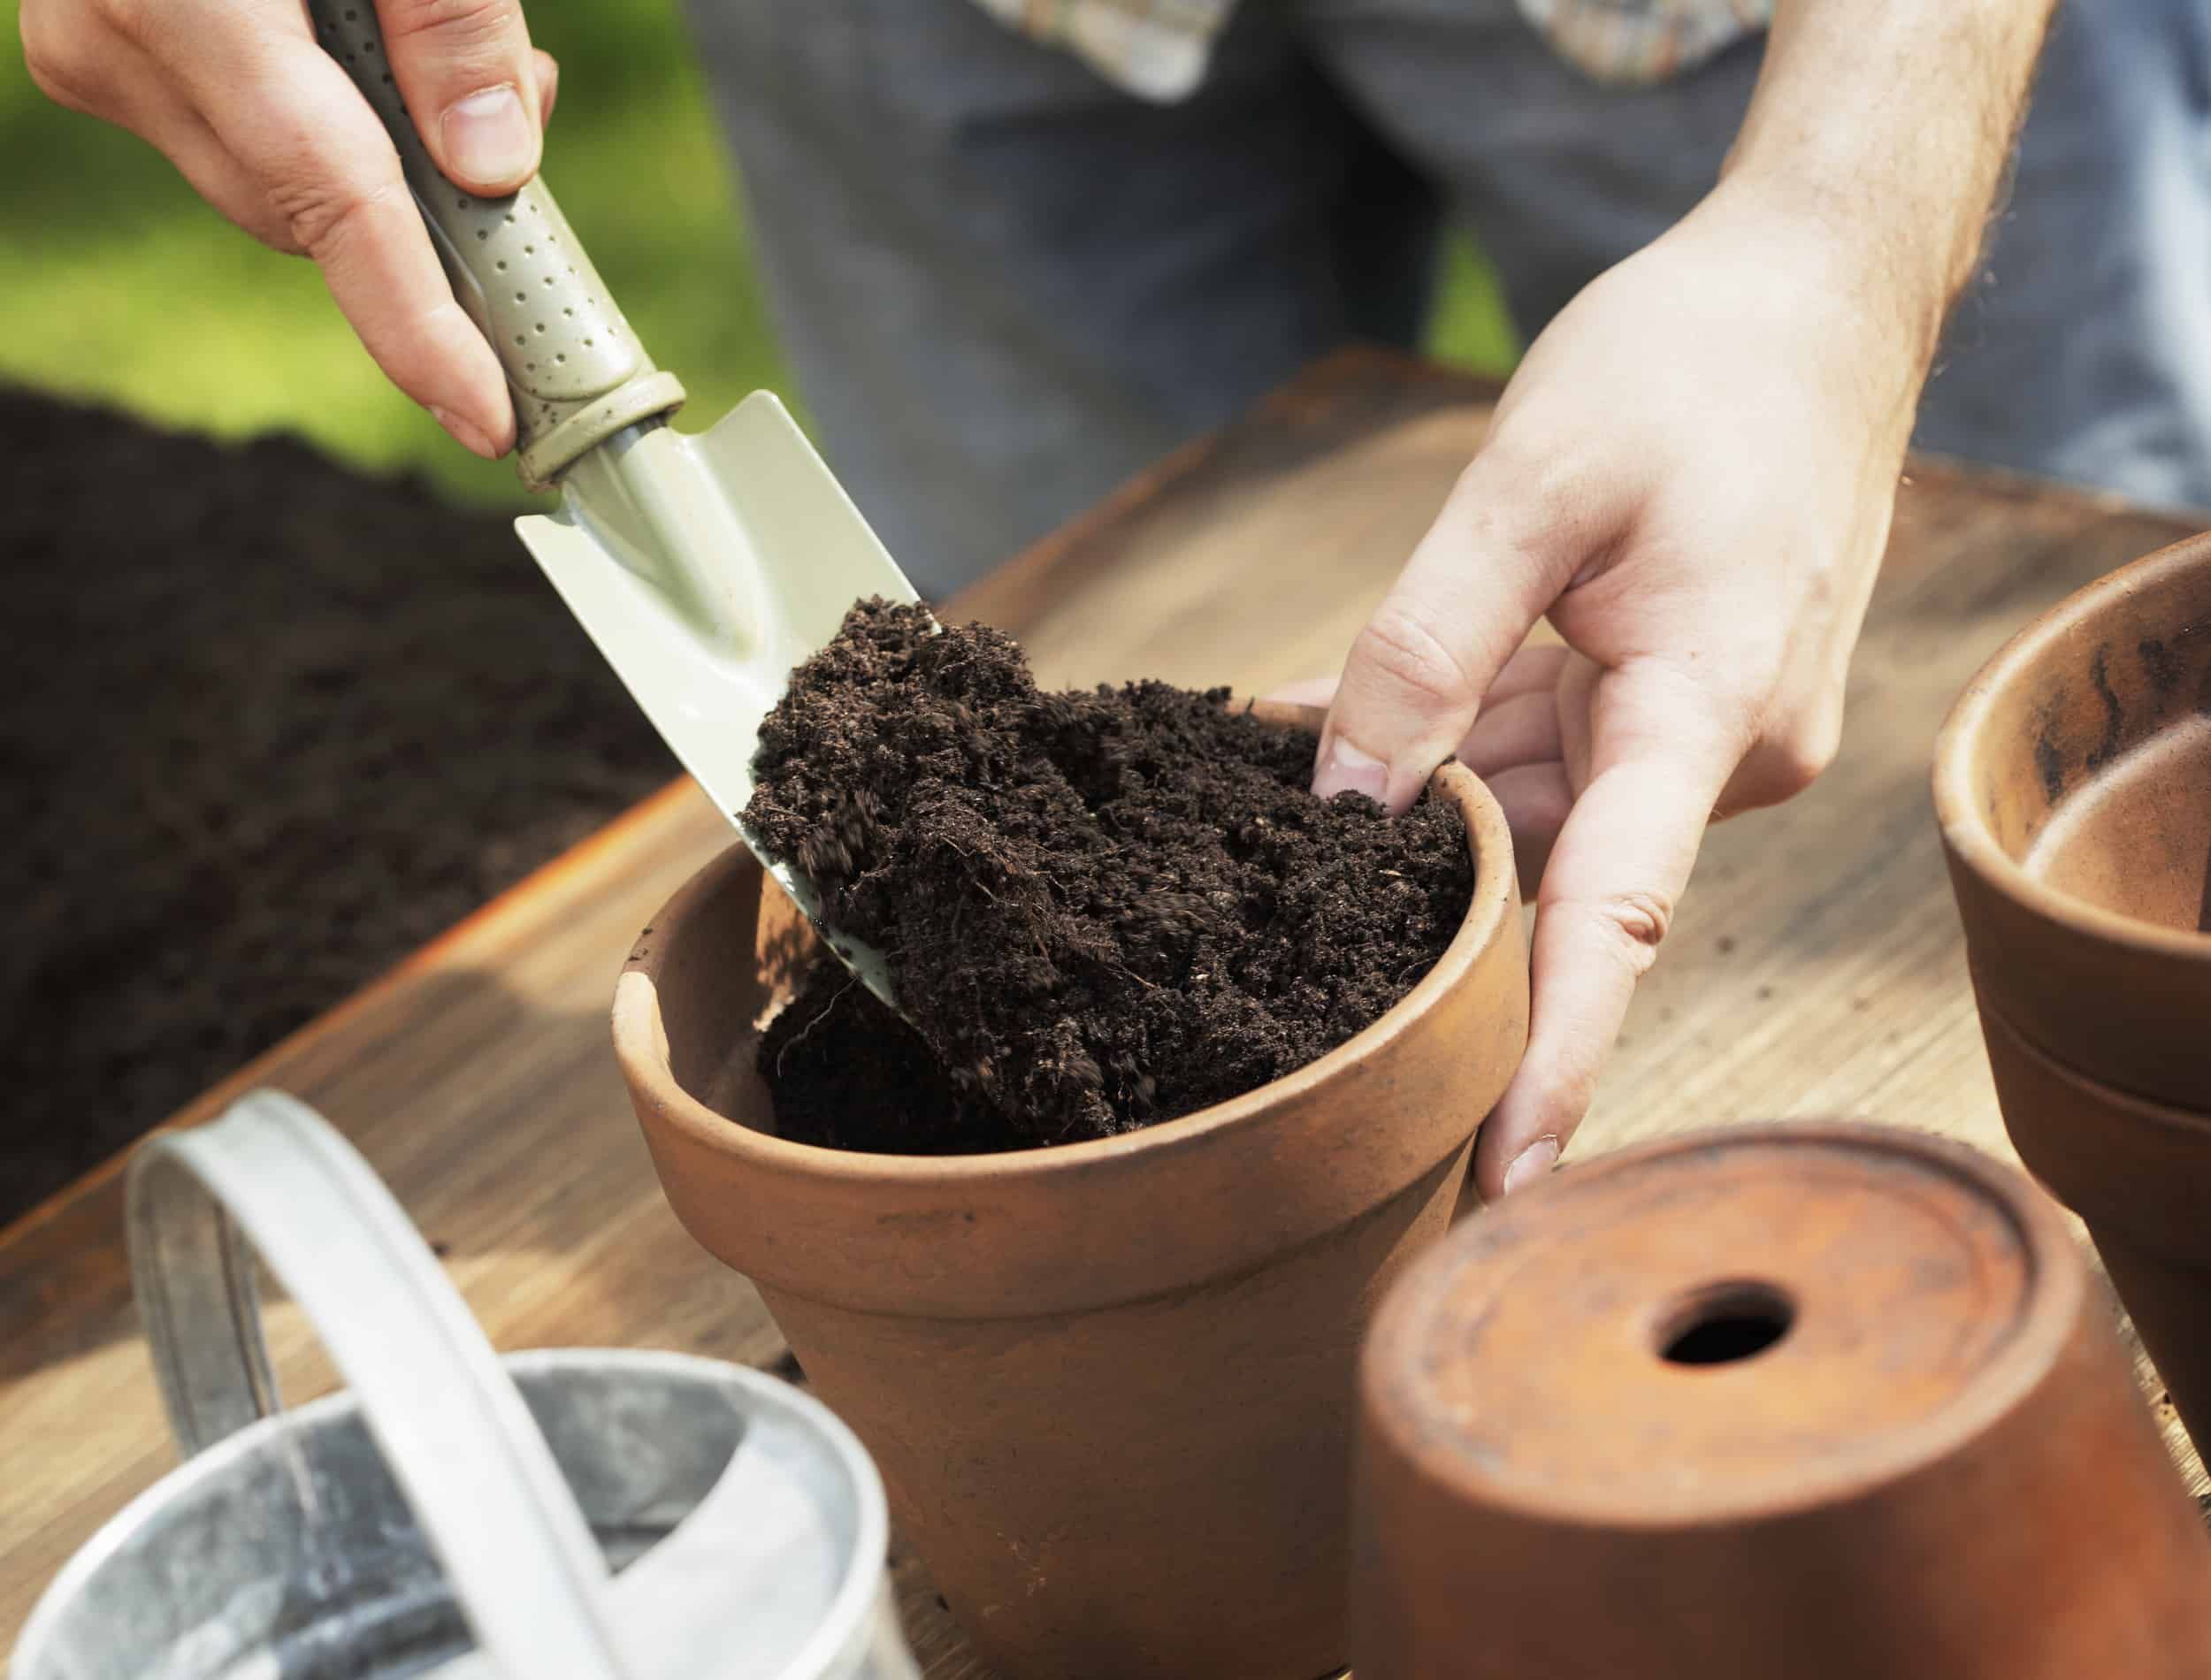 Hands putting soil to a clay flower pot